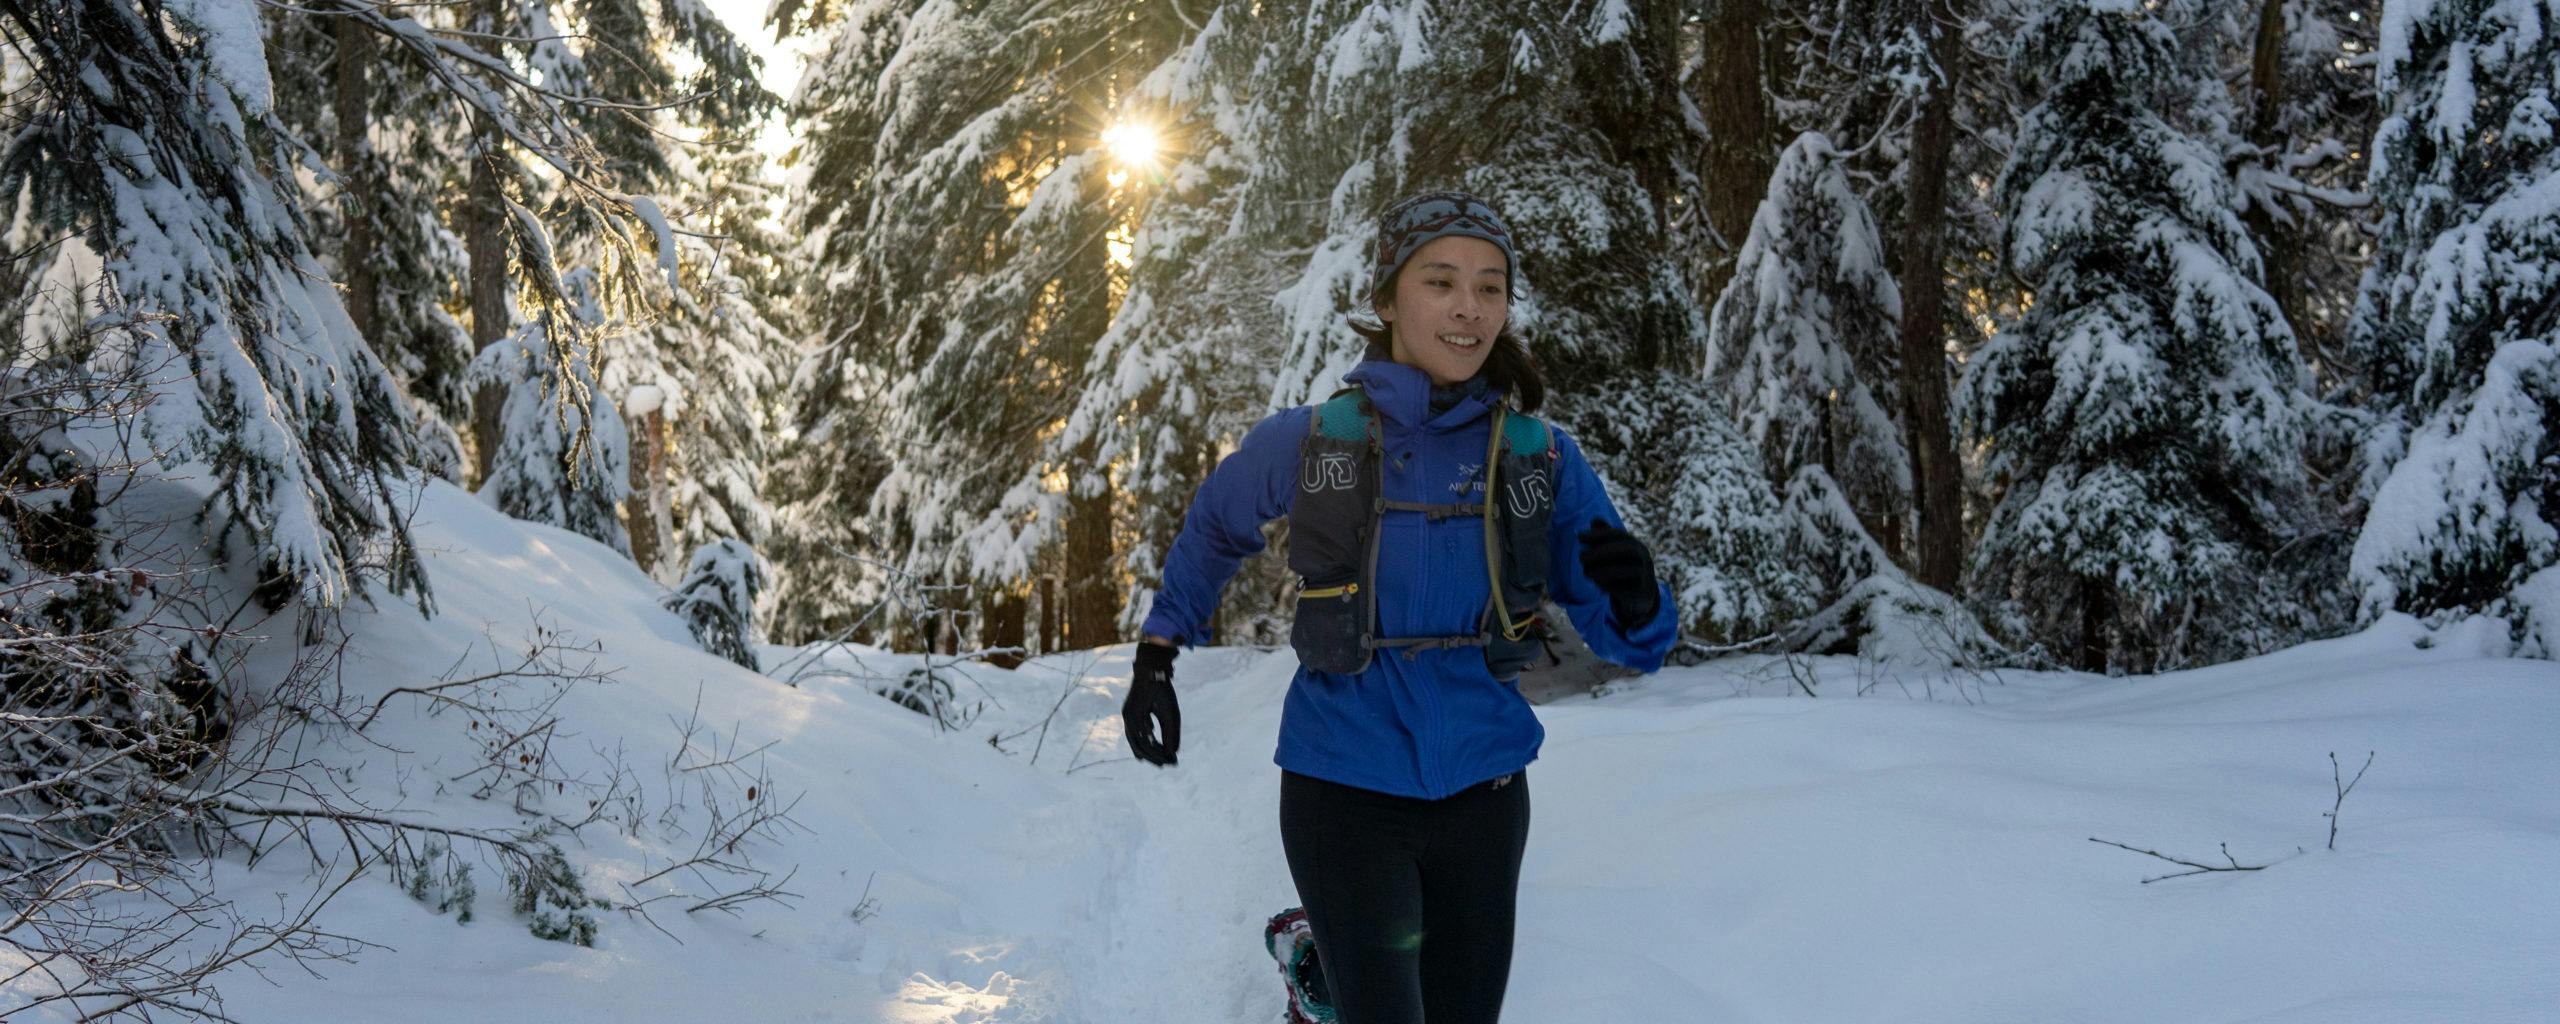 How to safely go running during winter in Quebec